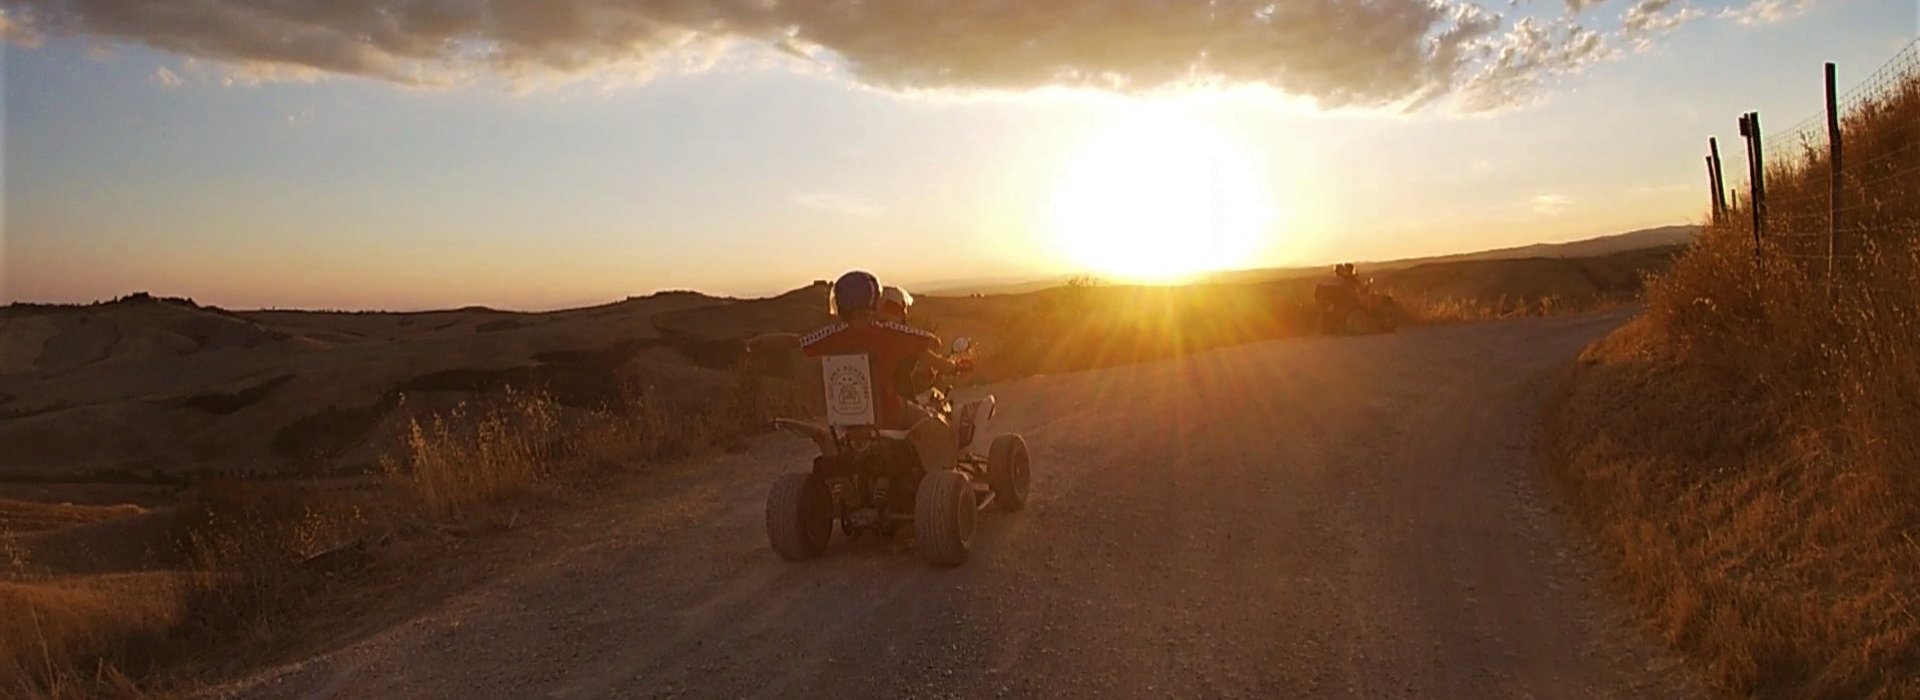 A quad tour at sunset on the hills of Asciano